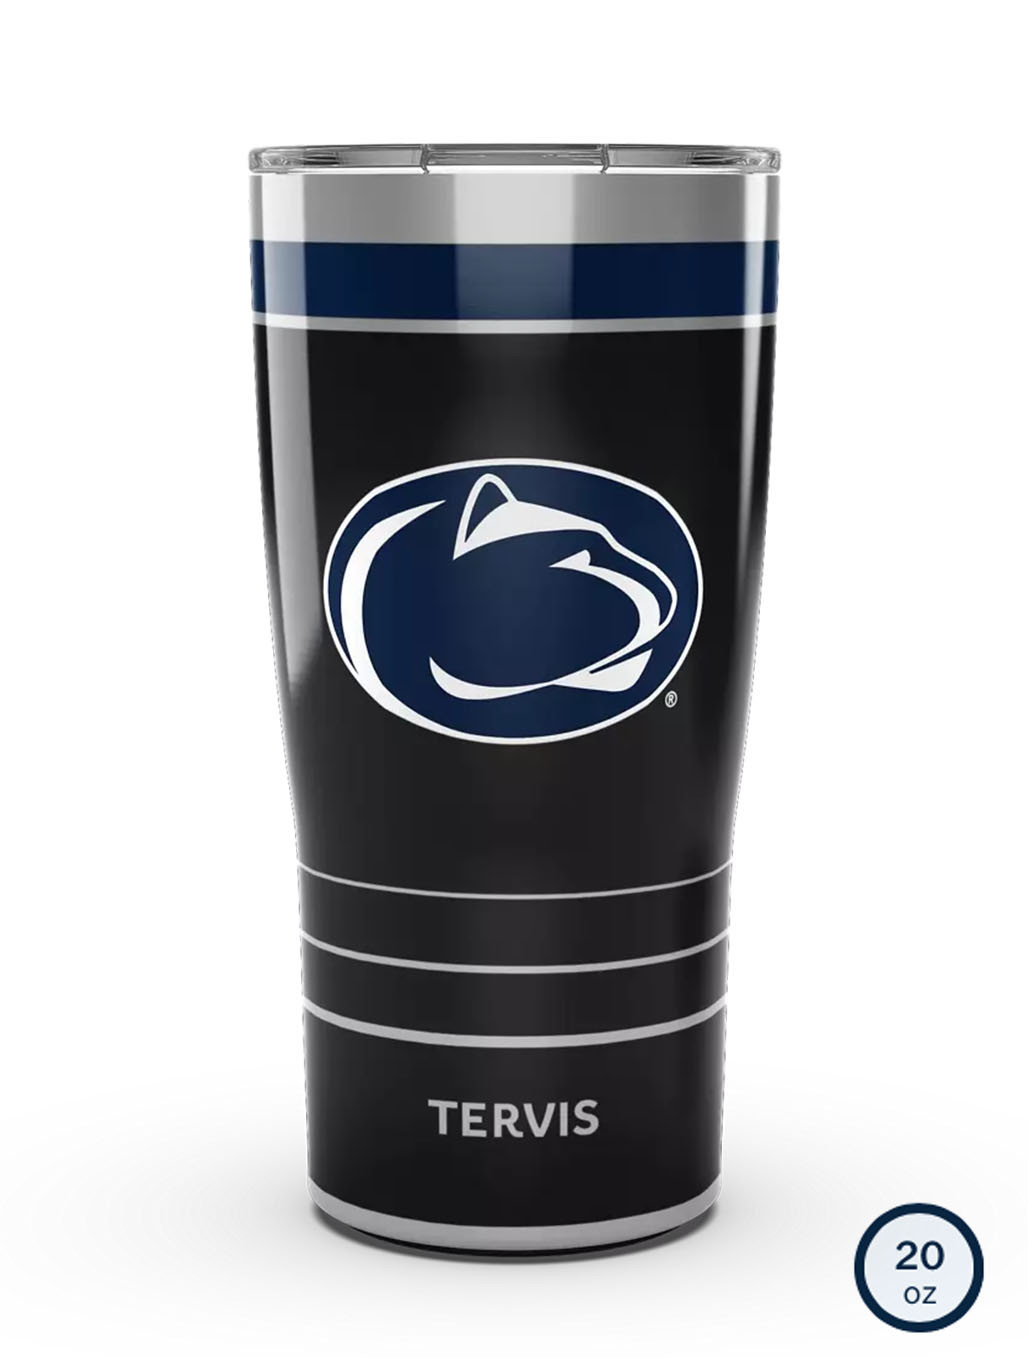 Penn State Night Game Stainless Steel Tervis Tumbler